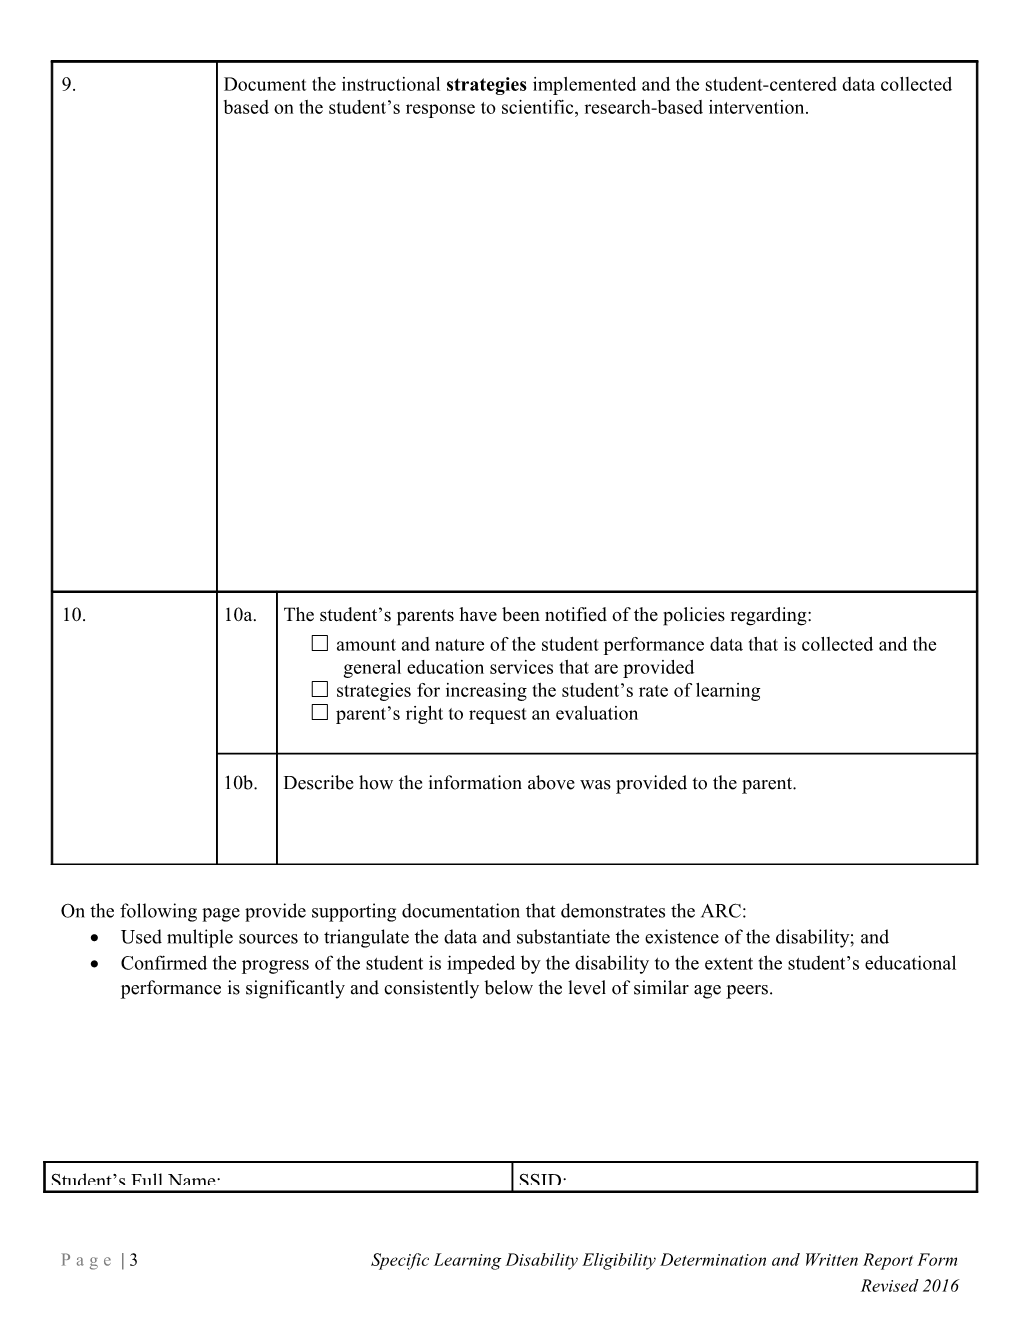 Specific Learning Disability Eligibility Determinination Form